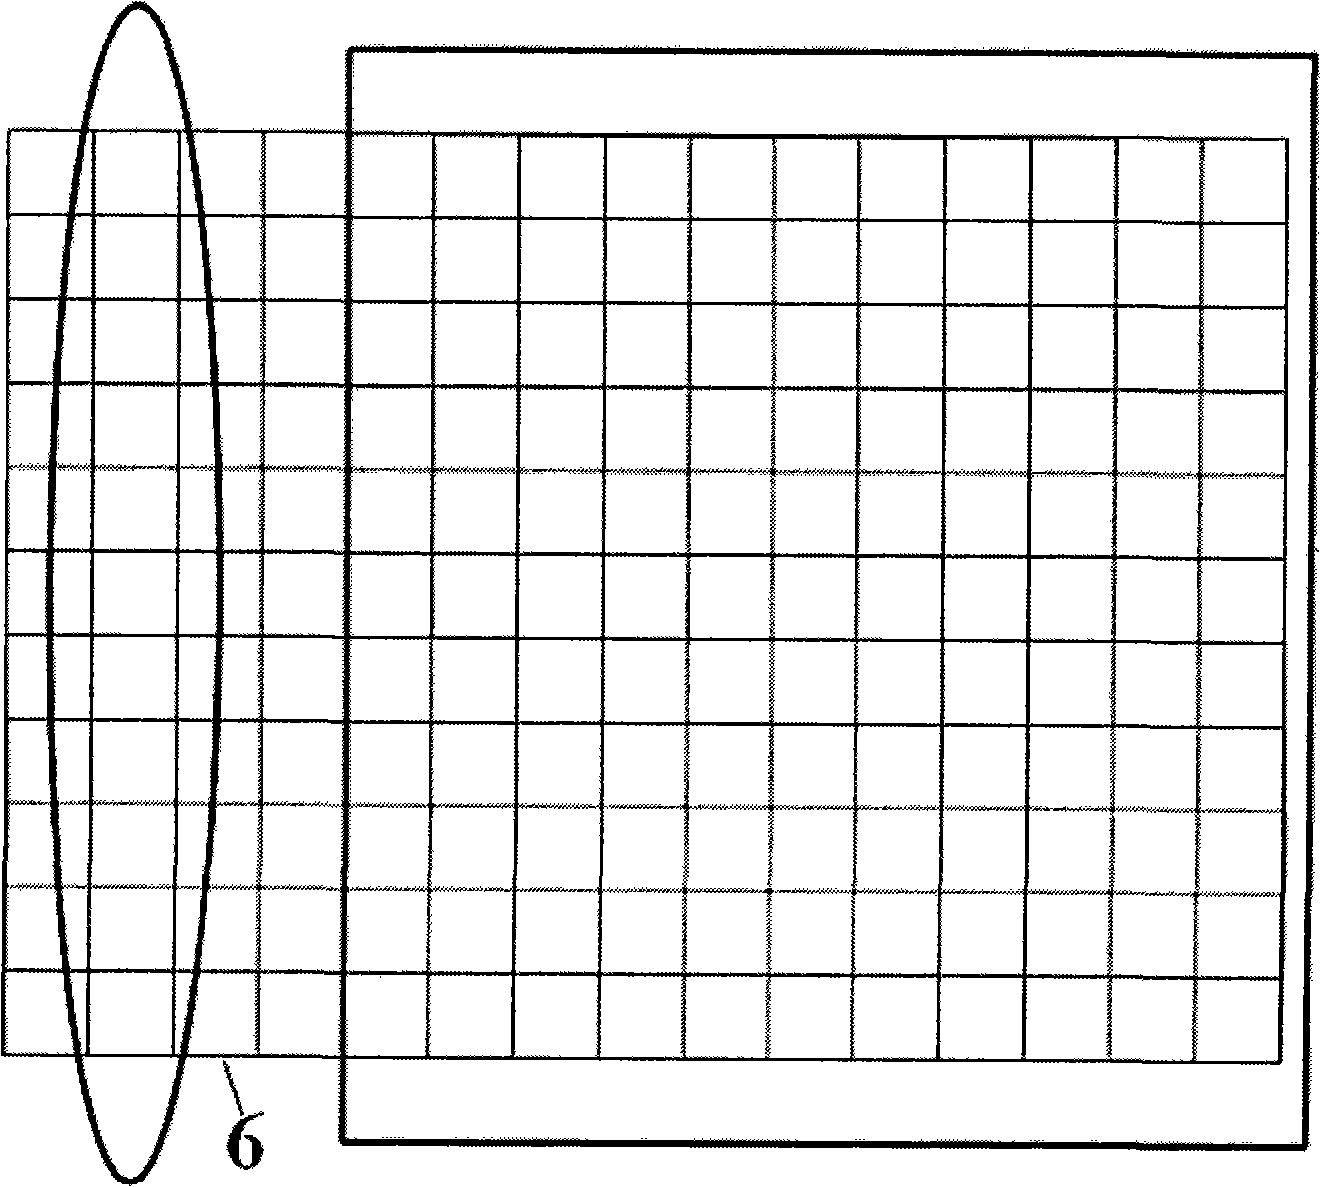 Embedded spectrum and radiation real-time calibration device